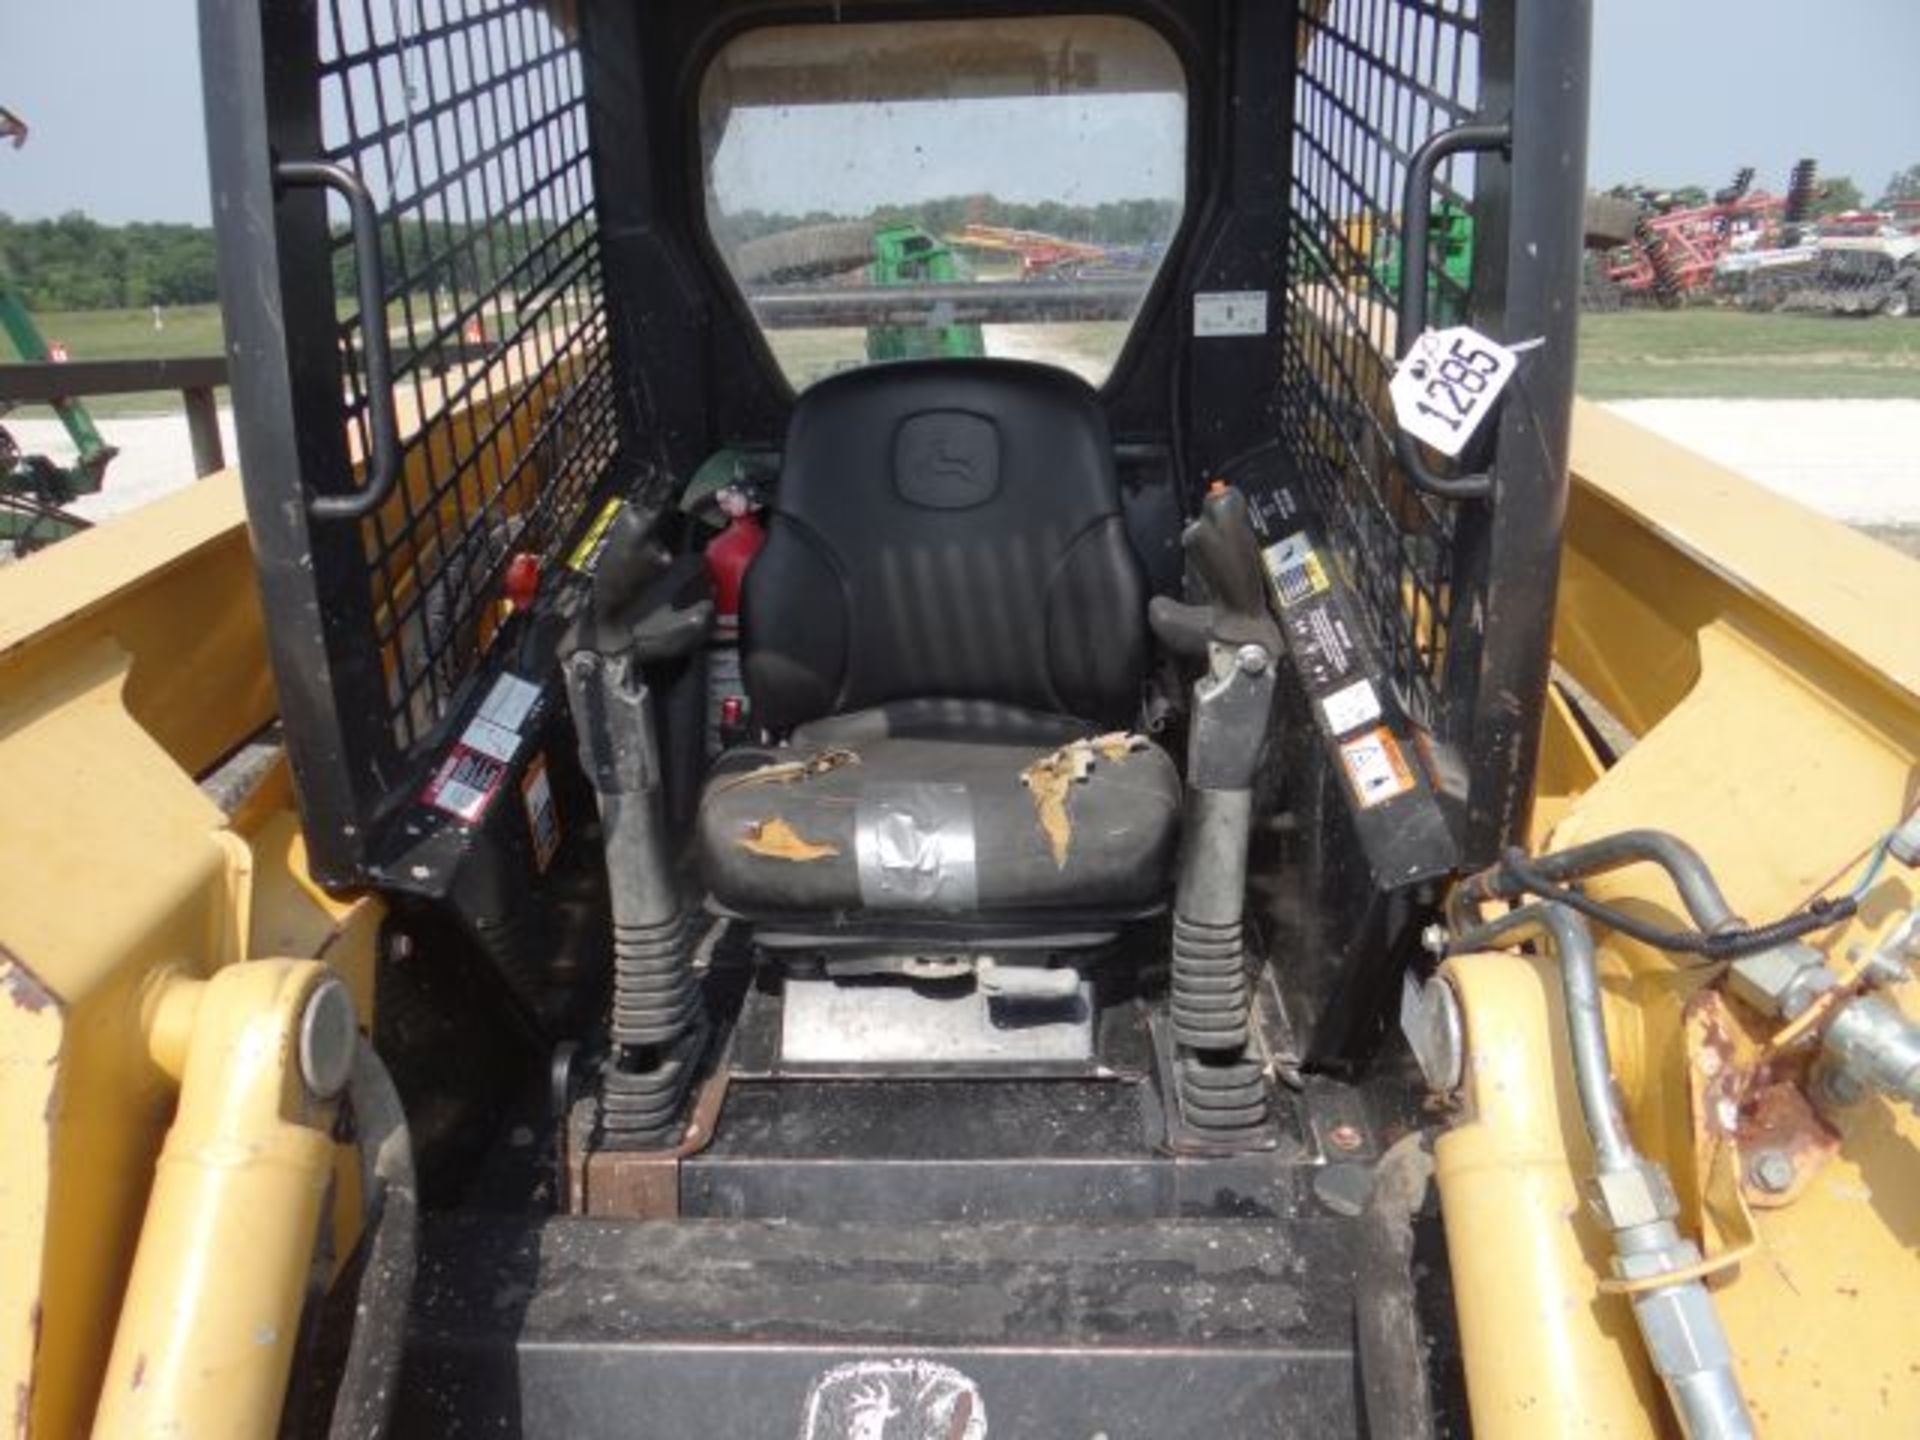 JD CT332 Skid Steer, 2008 #150551, 2130 hrs, 80hp, OS, Hand Controls, 80% Tracks, 84" Bucket - Image 4 of 4